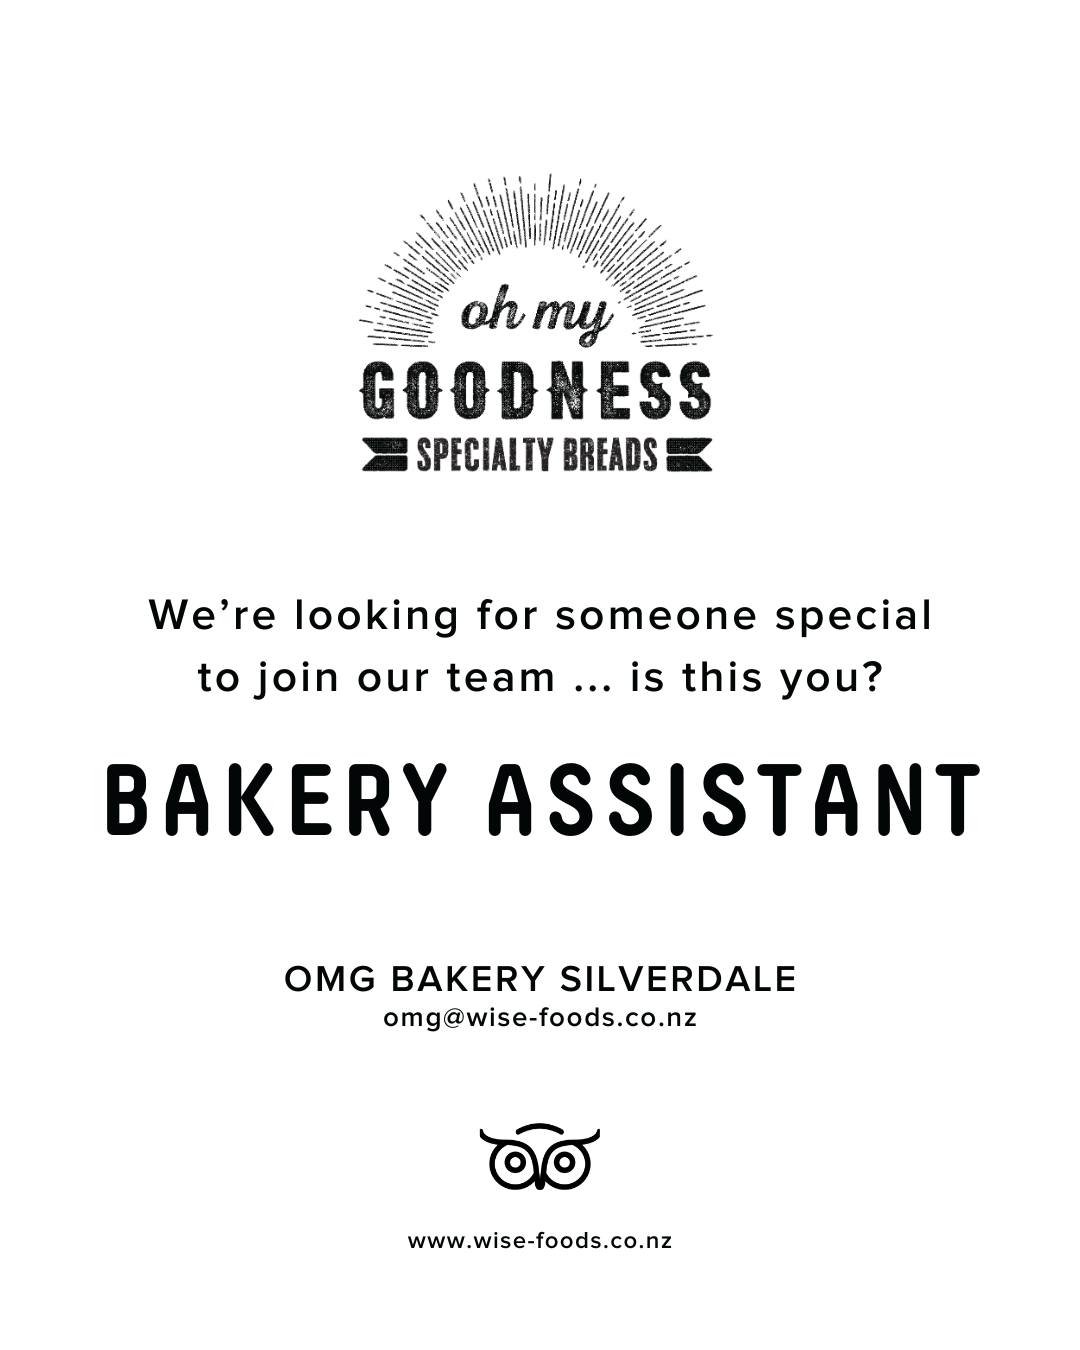 Bakery Assistant